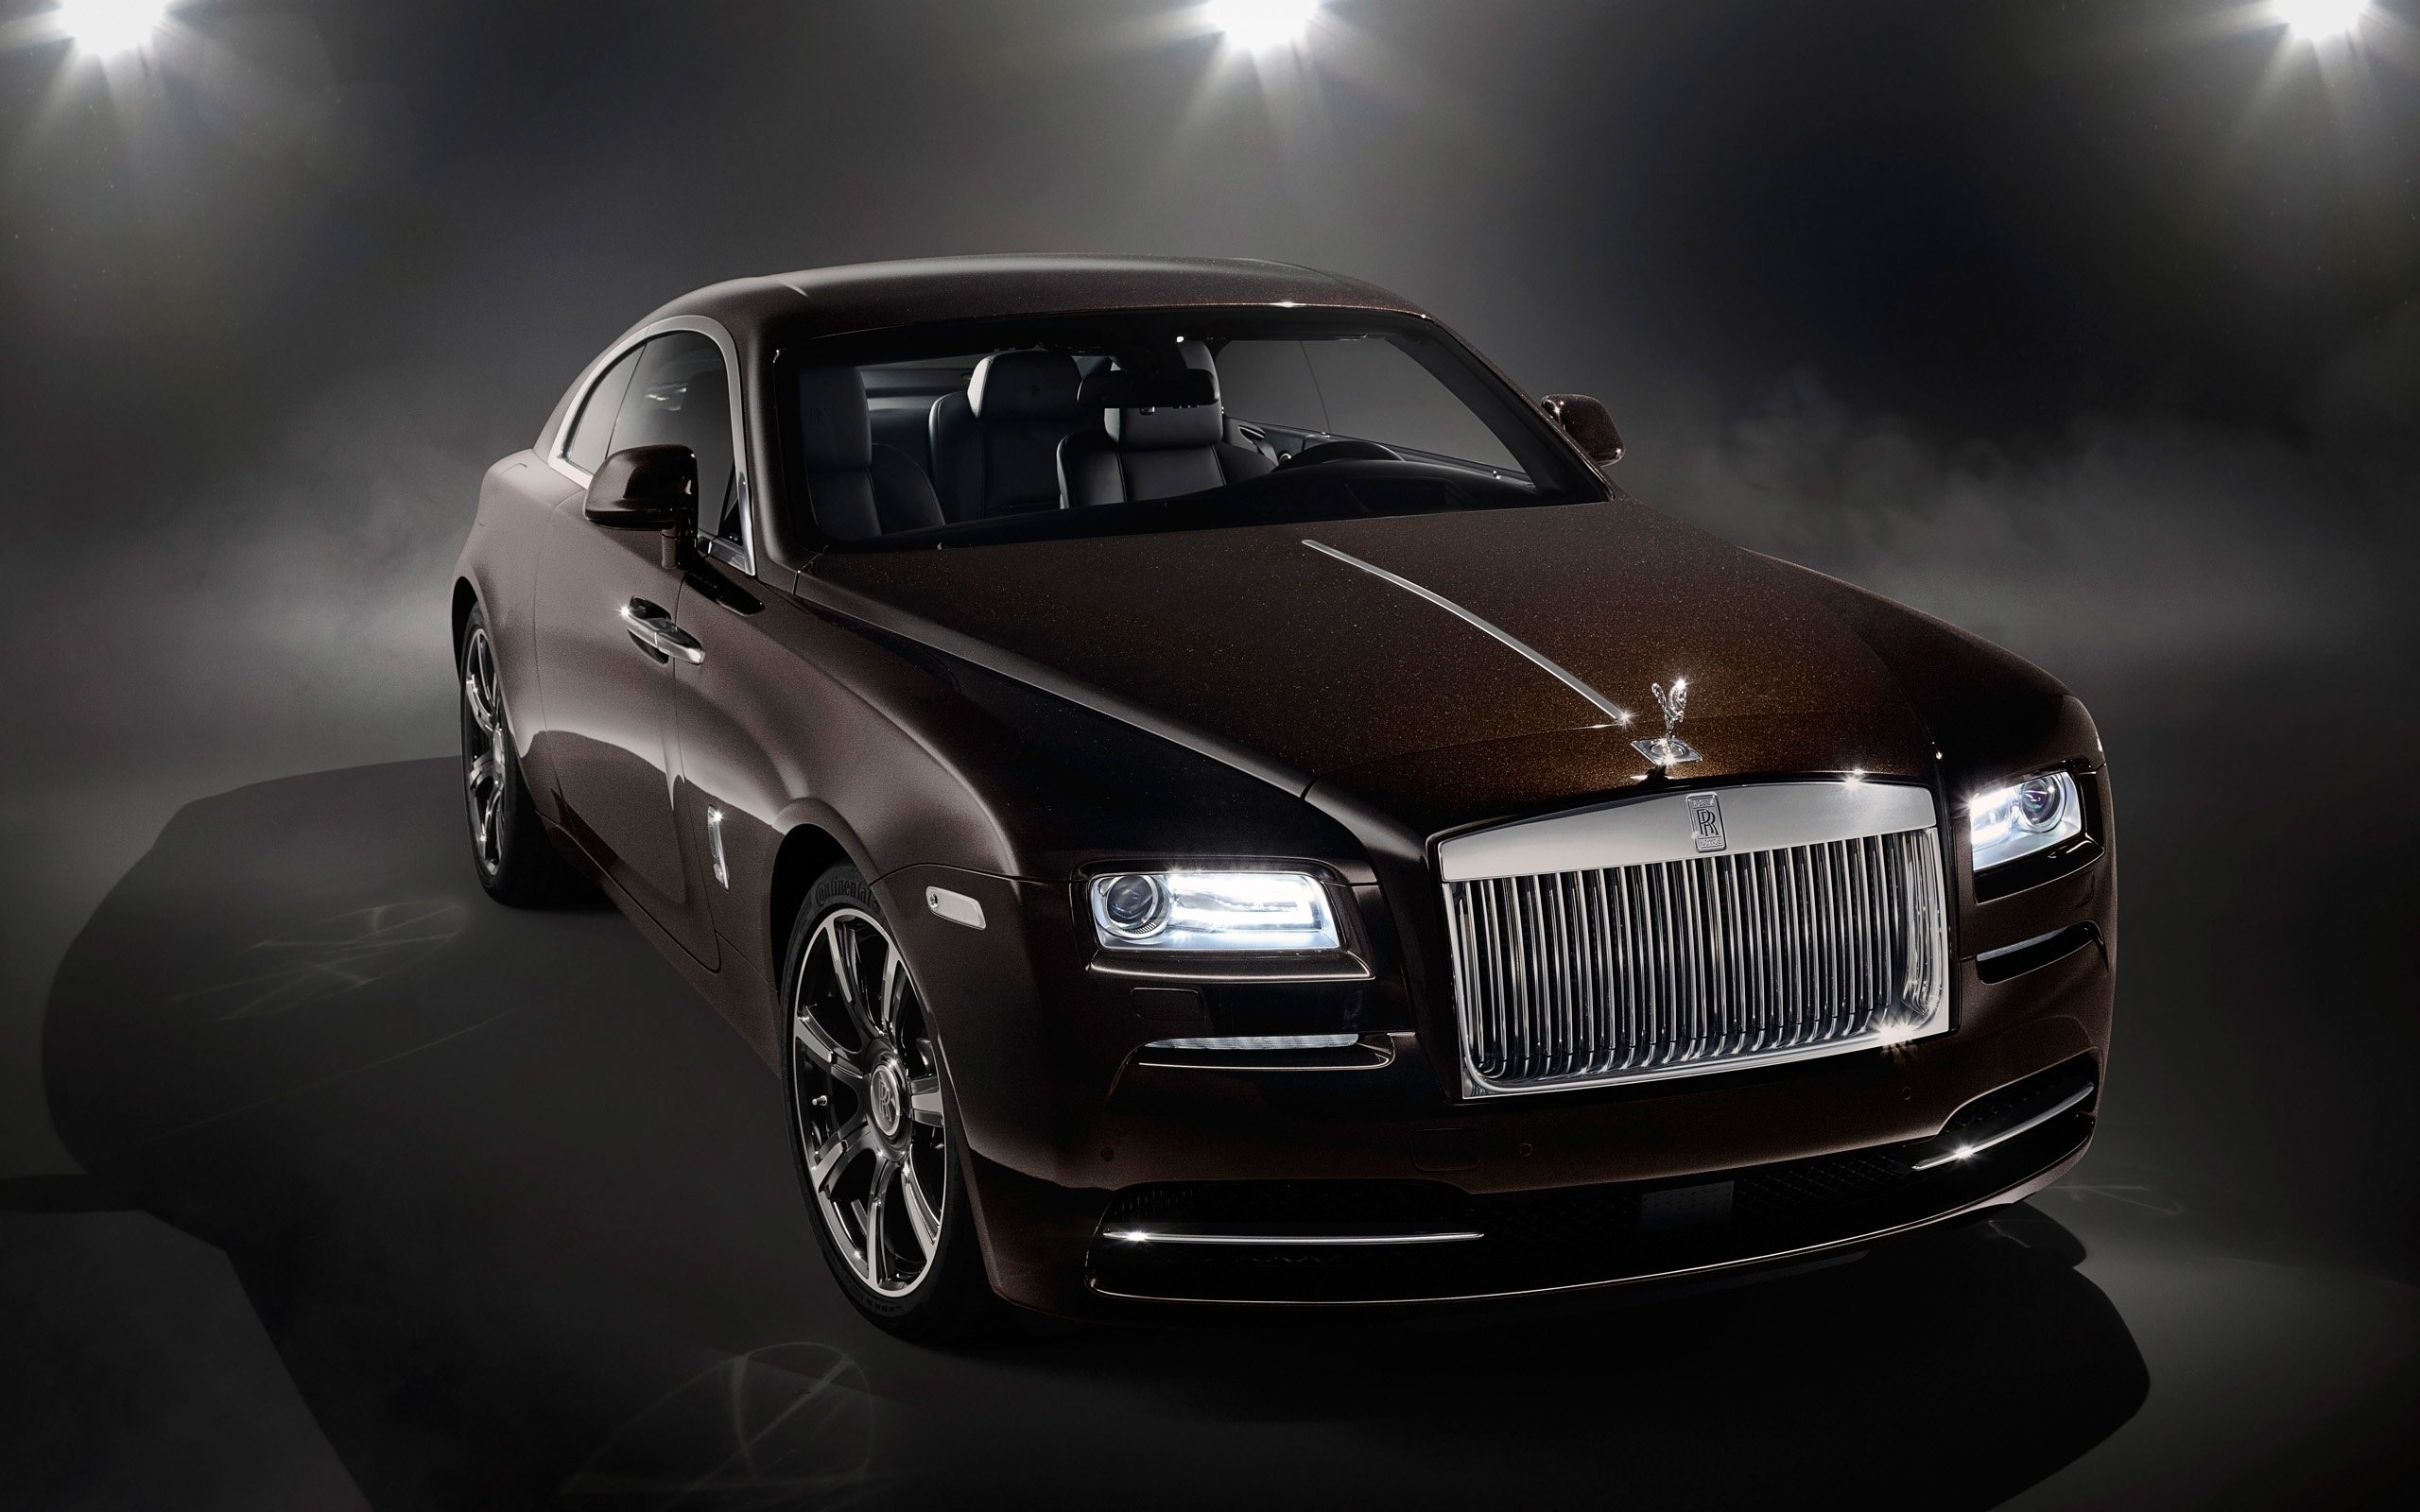 Rolls-Royce Wraith, Music-inspired car, Luxury and elegance, Exquisite wallpapers, 2560x1600 HD Desktop